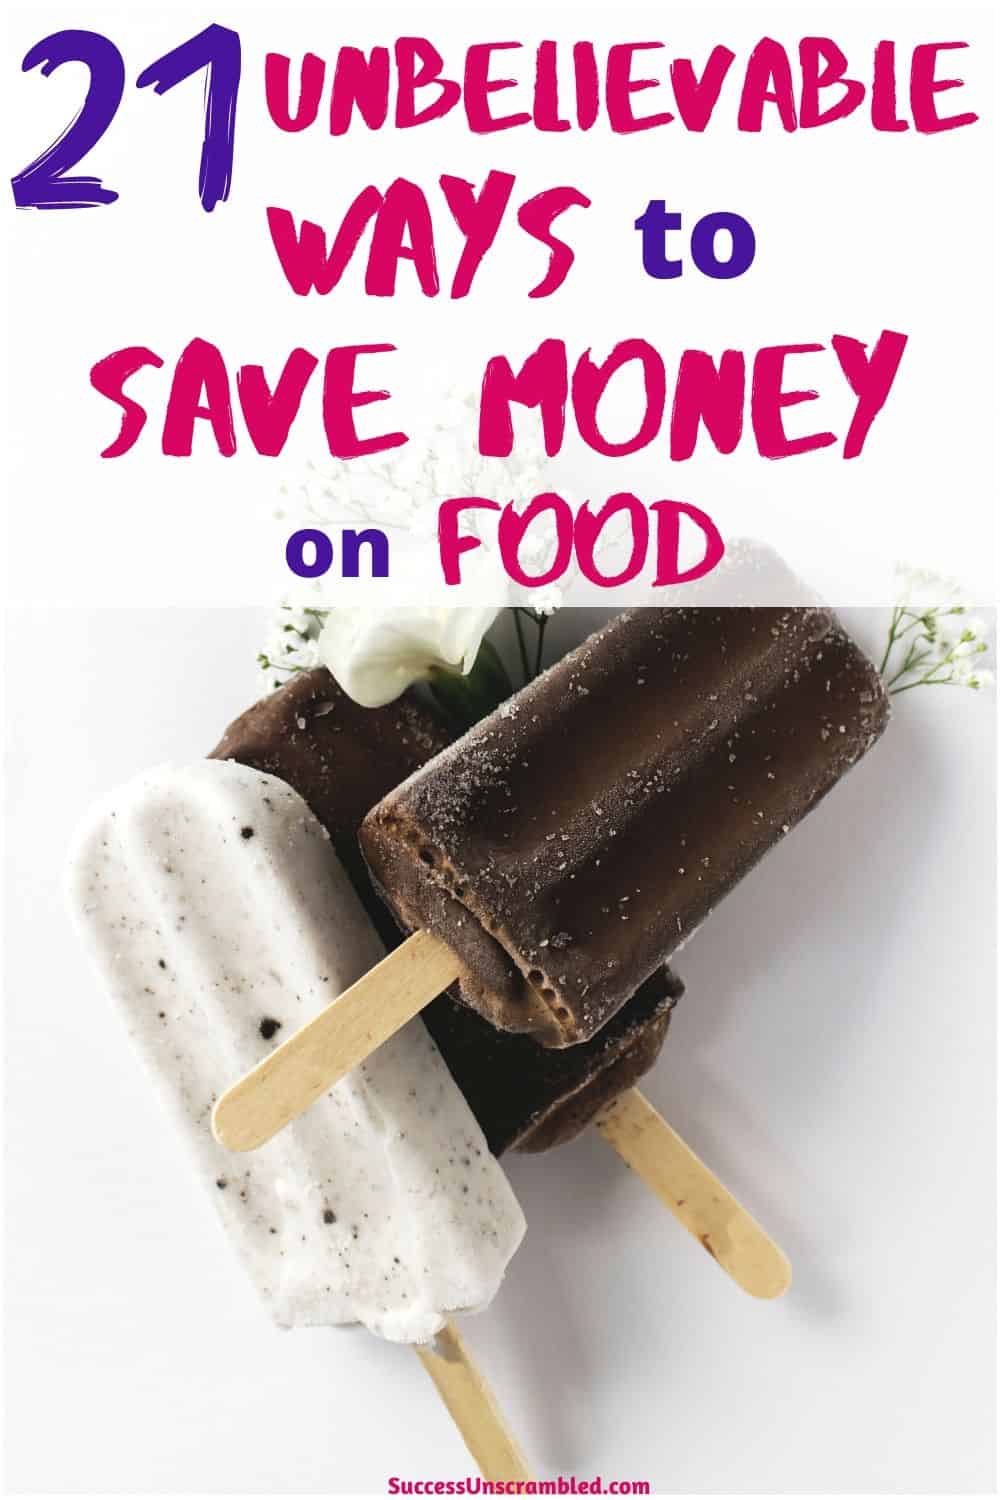 Save money of food, ice cream, chocolate, fruits, toilet paper, vegetables, buy in bulk, leftovers, freeze sliced bread - pin 1